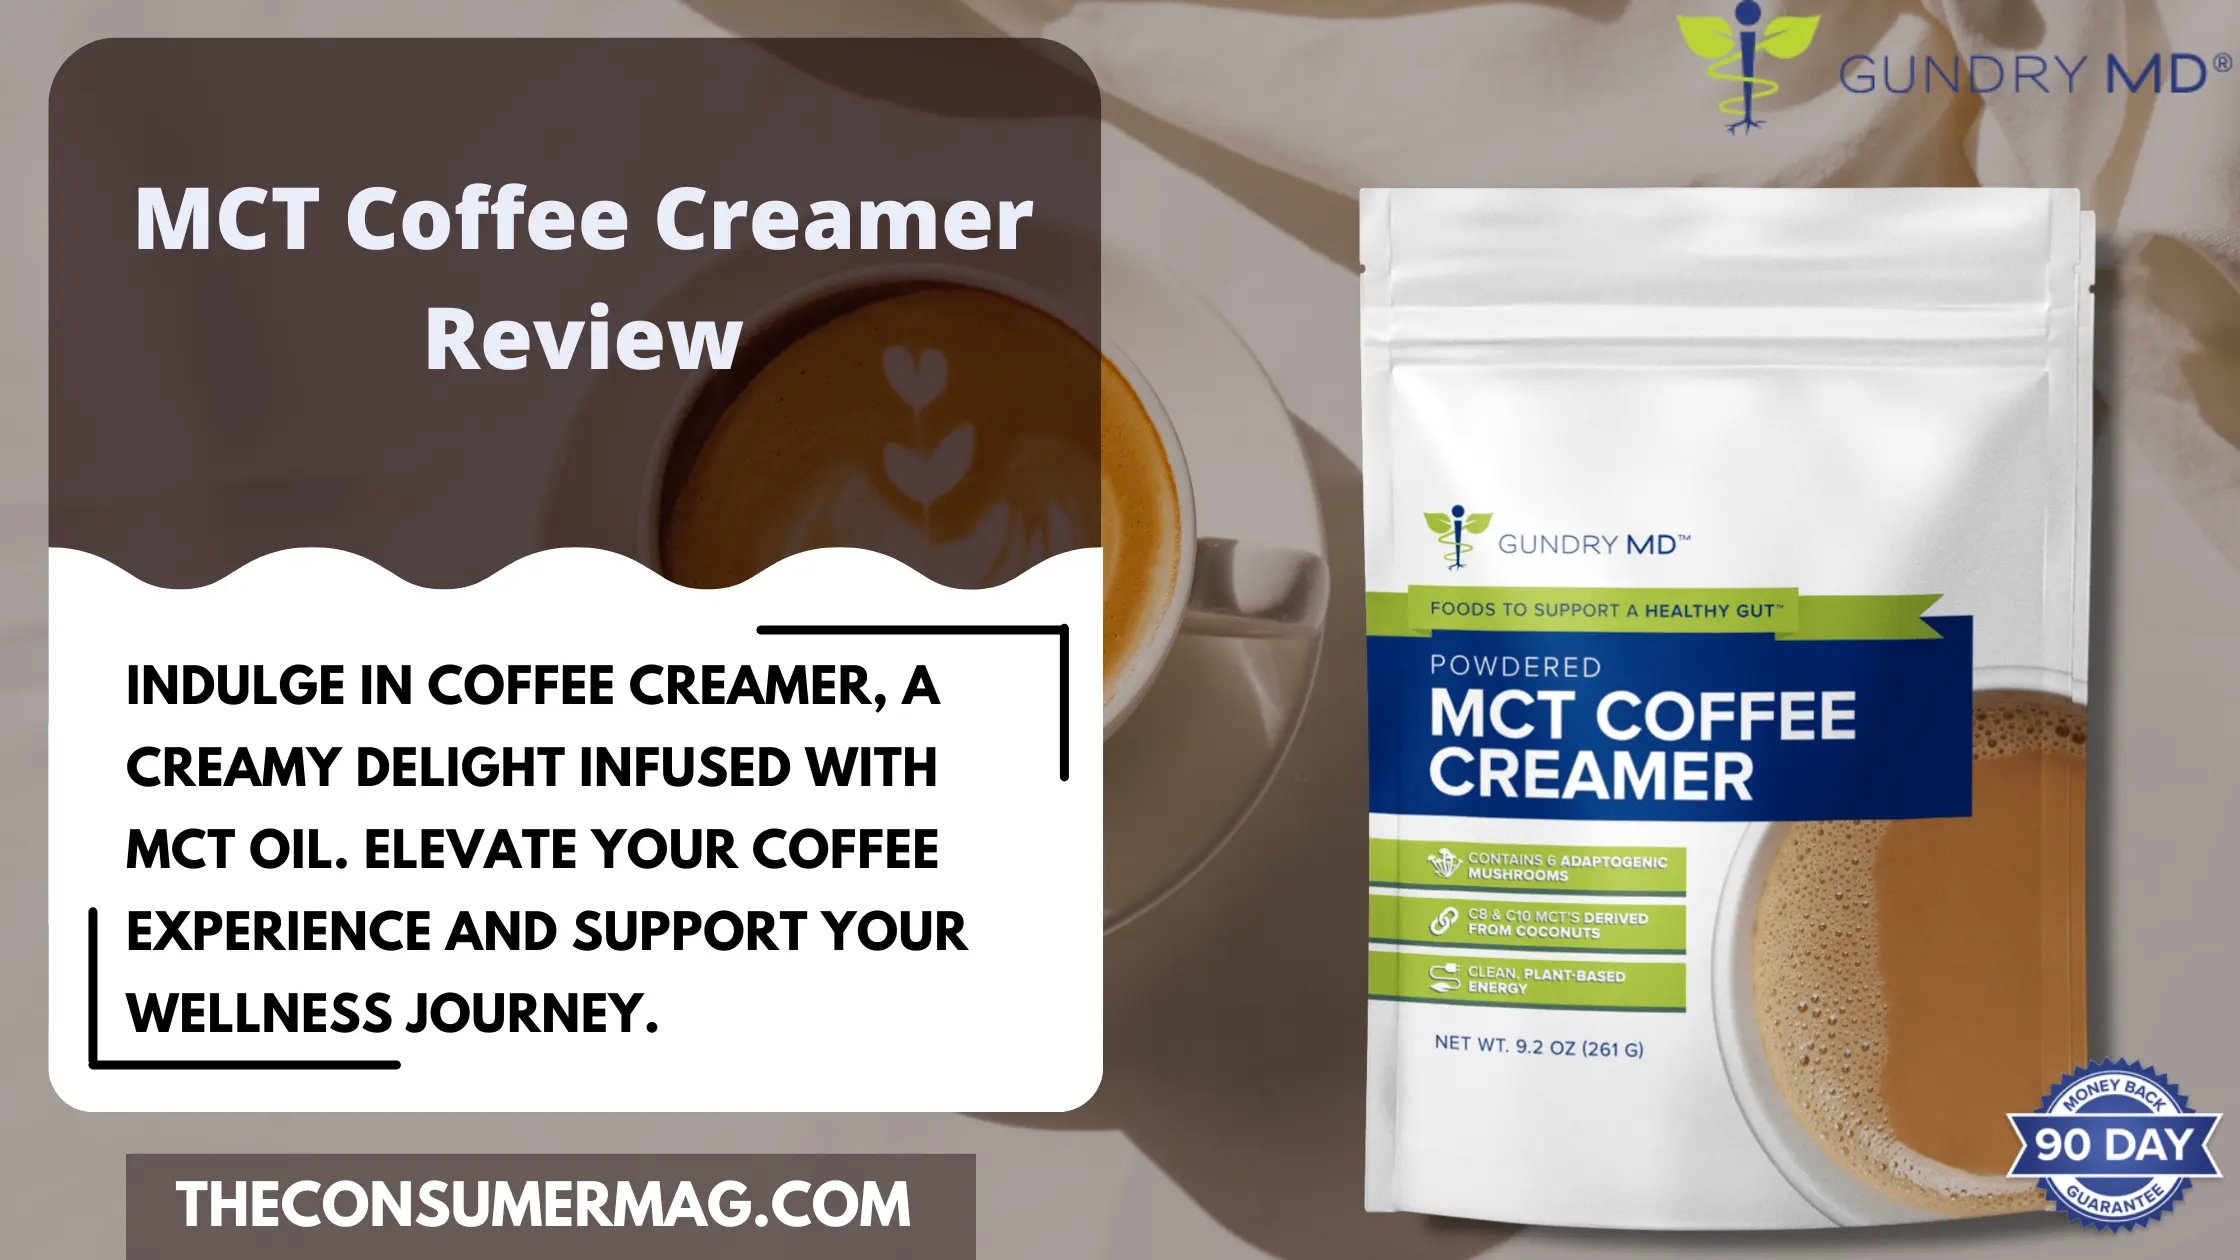 Gundry MD MCT Coffee Creamer Review | Read All Gundry Coffee Creamer Reviews